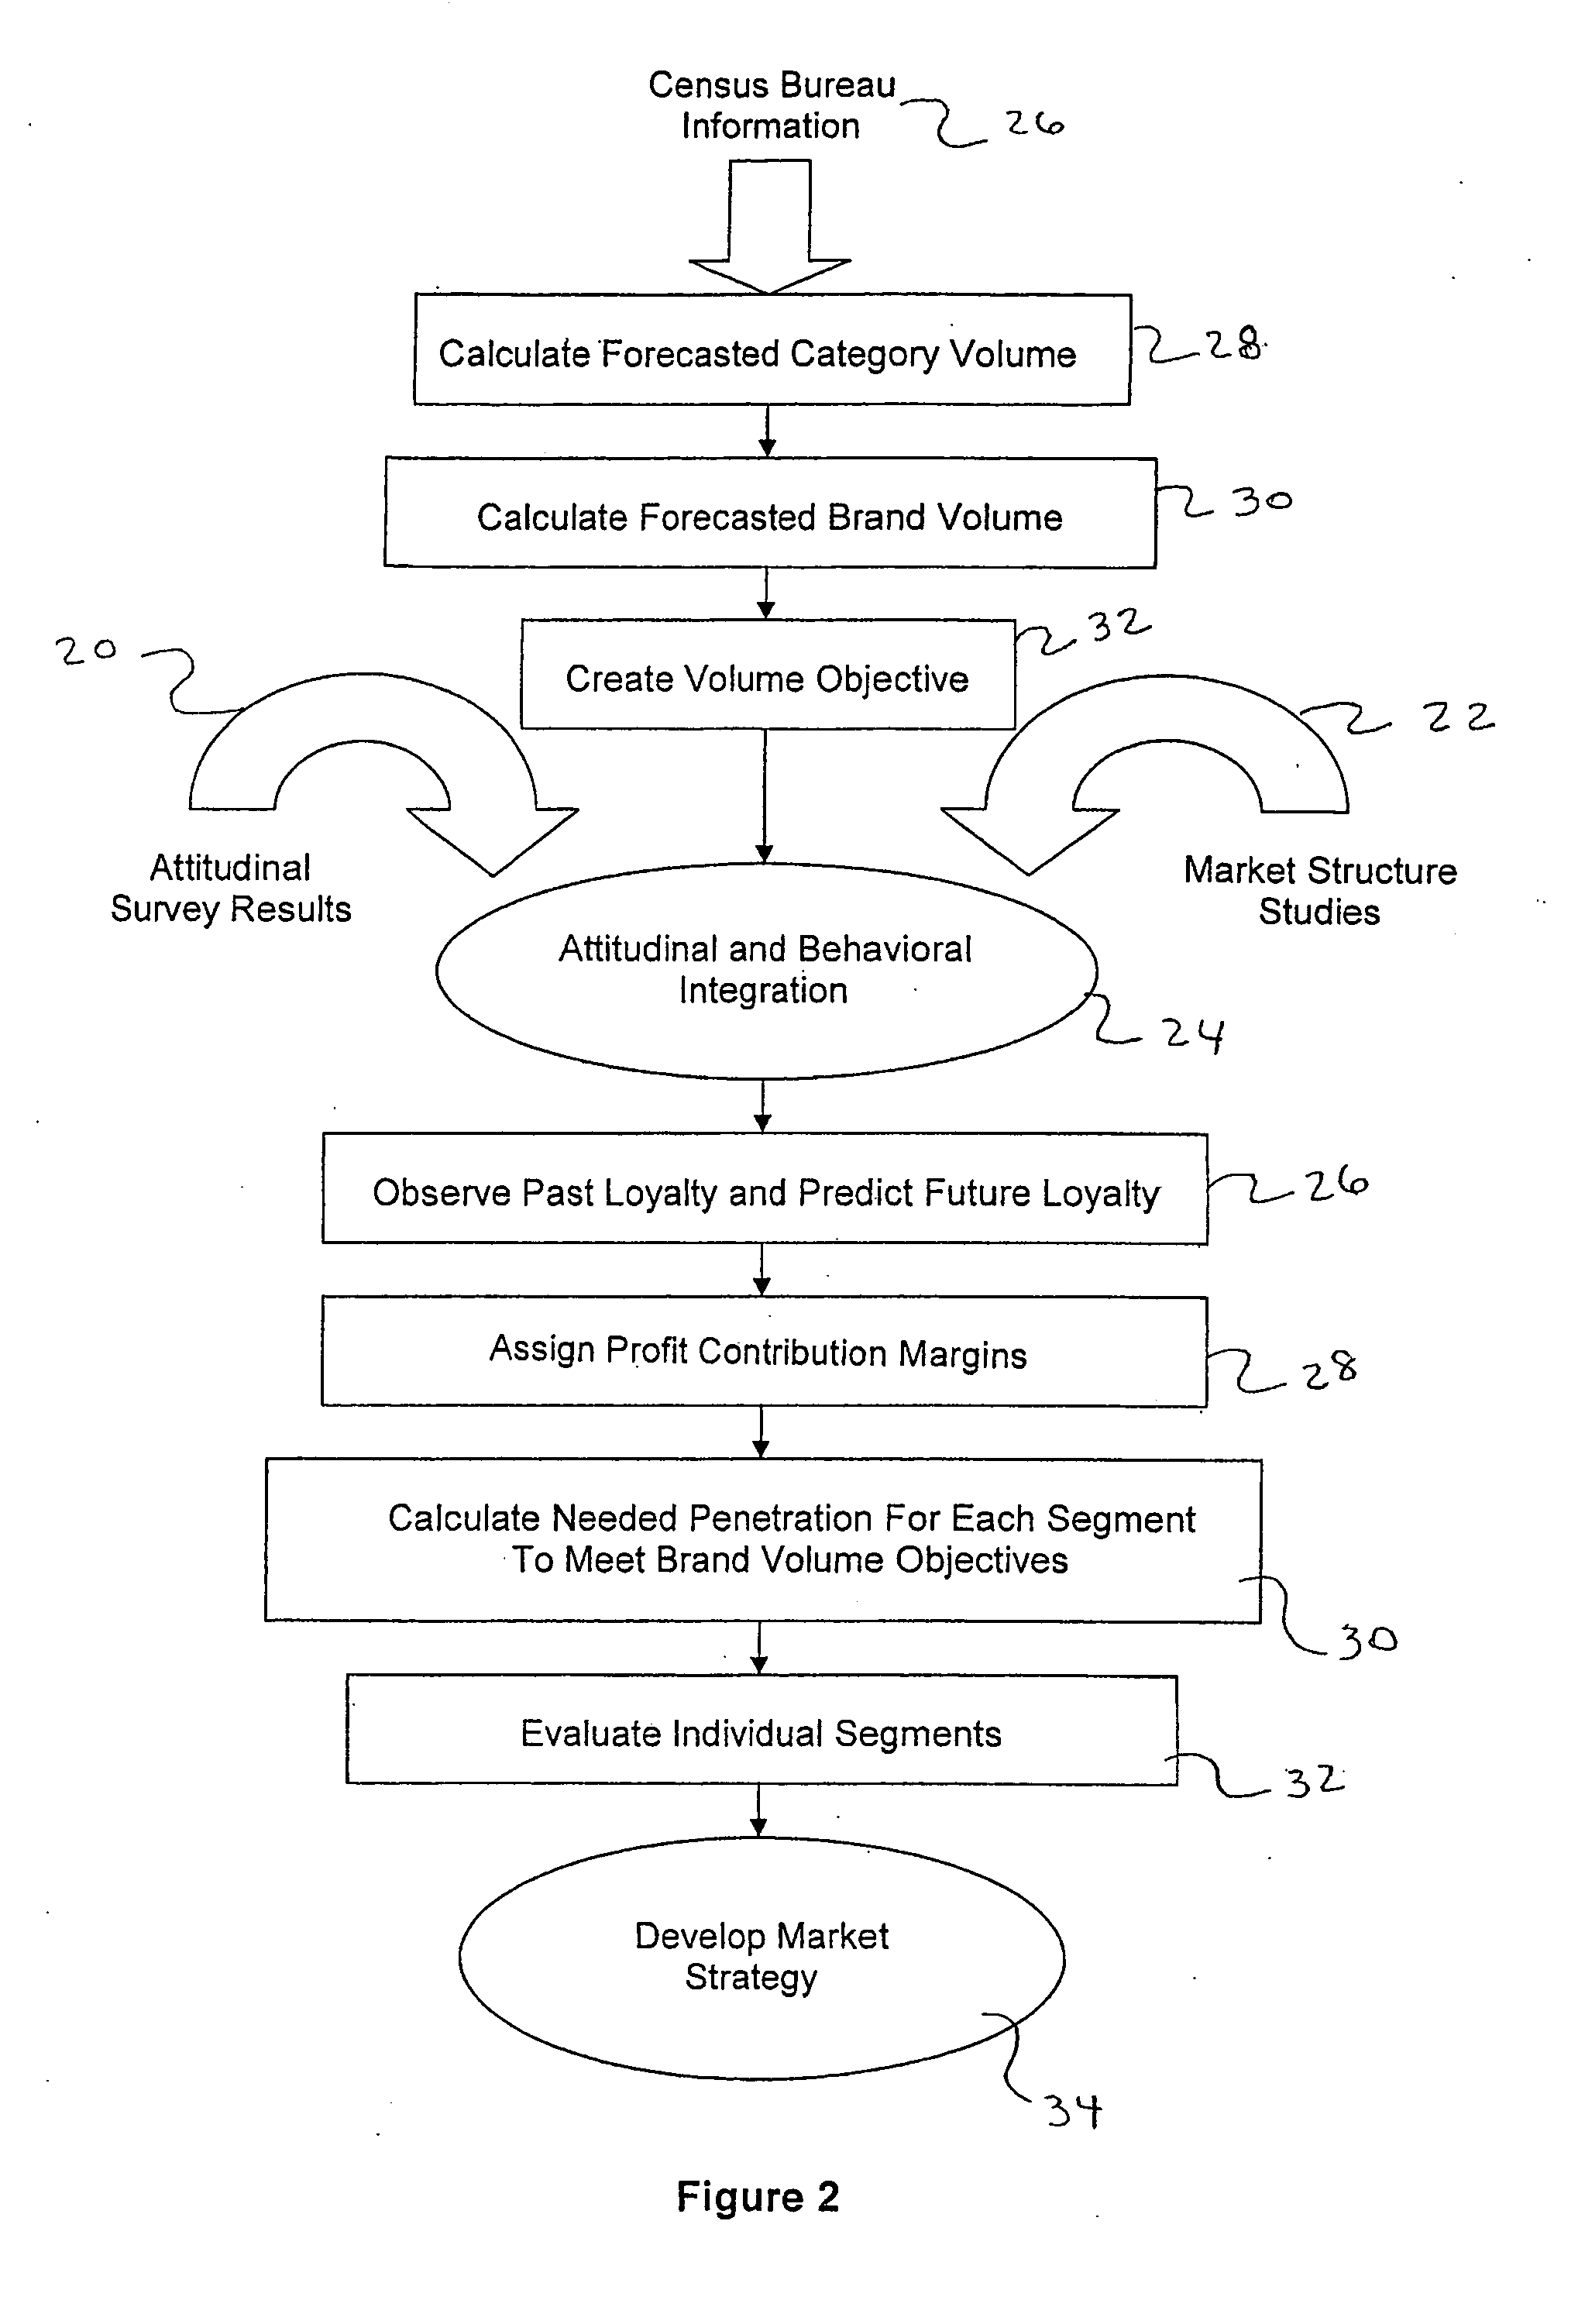 Method for integrating attitudinal and behavioral data for marketing consumer products